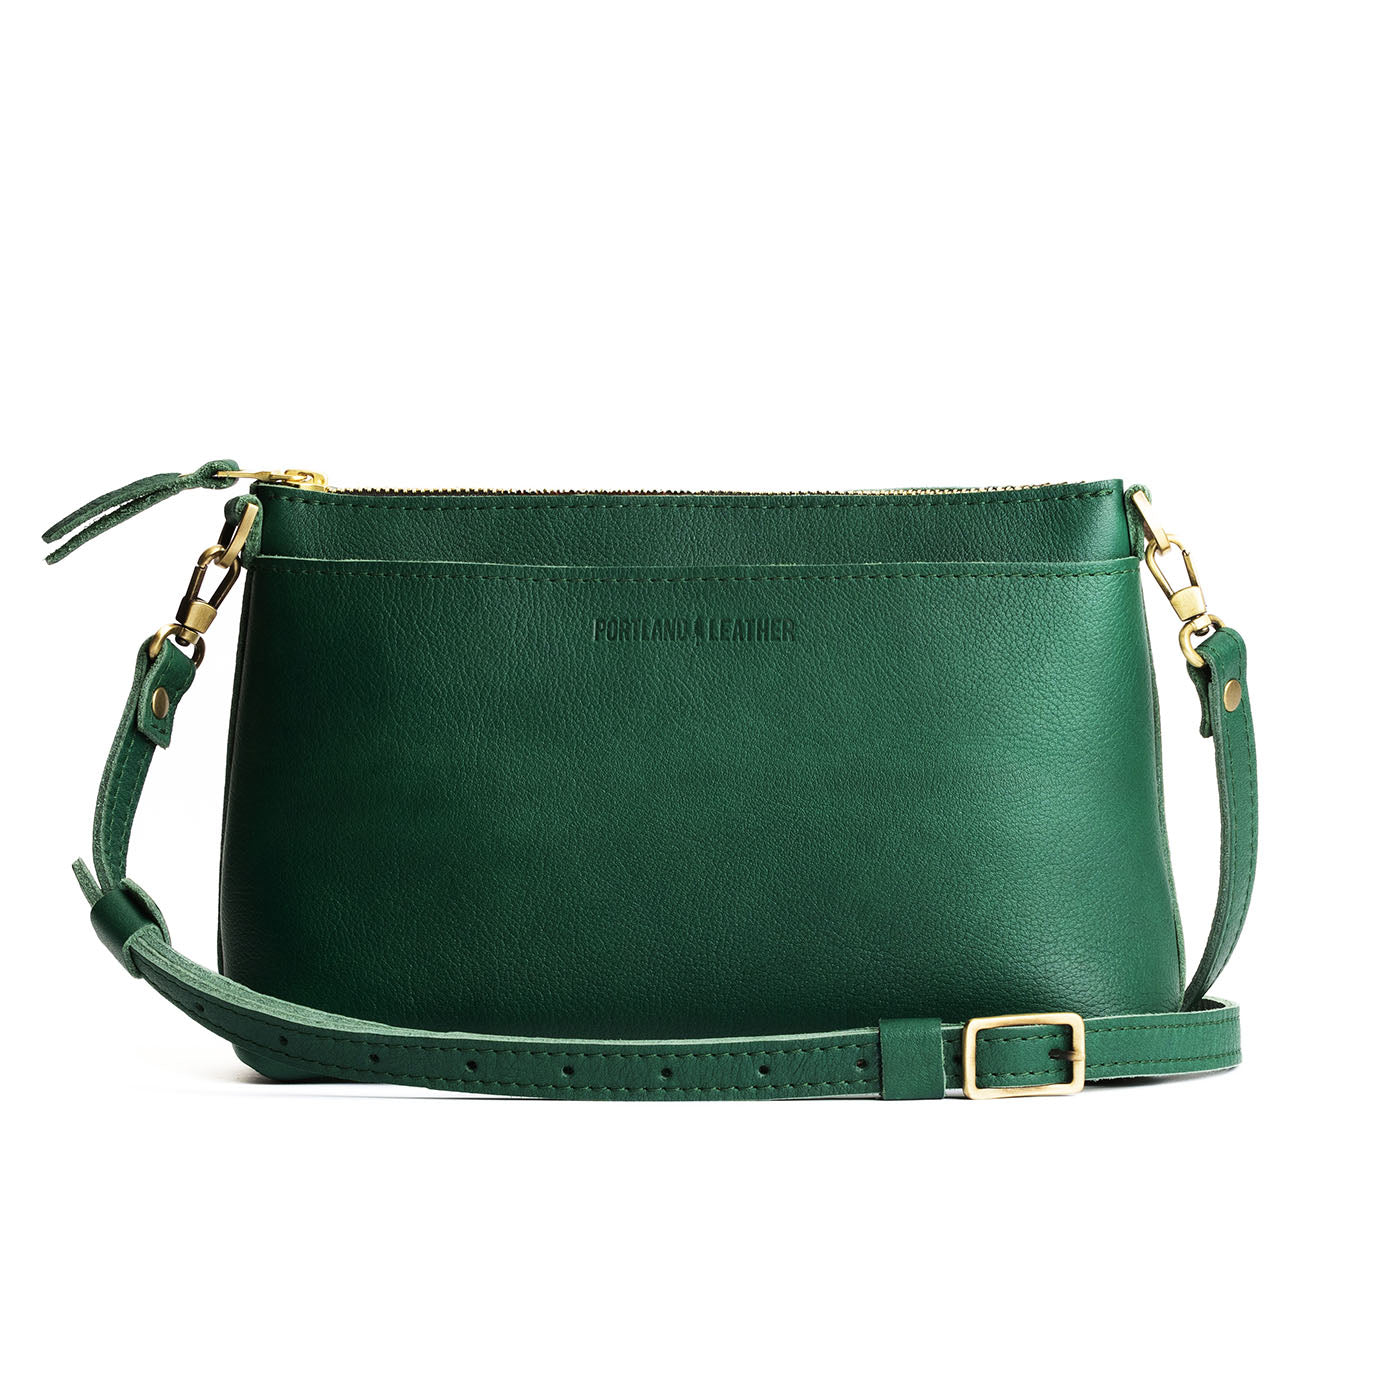 StoryLeather.com - Handcrafted Genuine Leather Chamberlin Short Wristlet  Coin Purse in Dark Green Calfskin